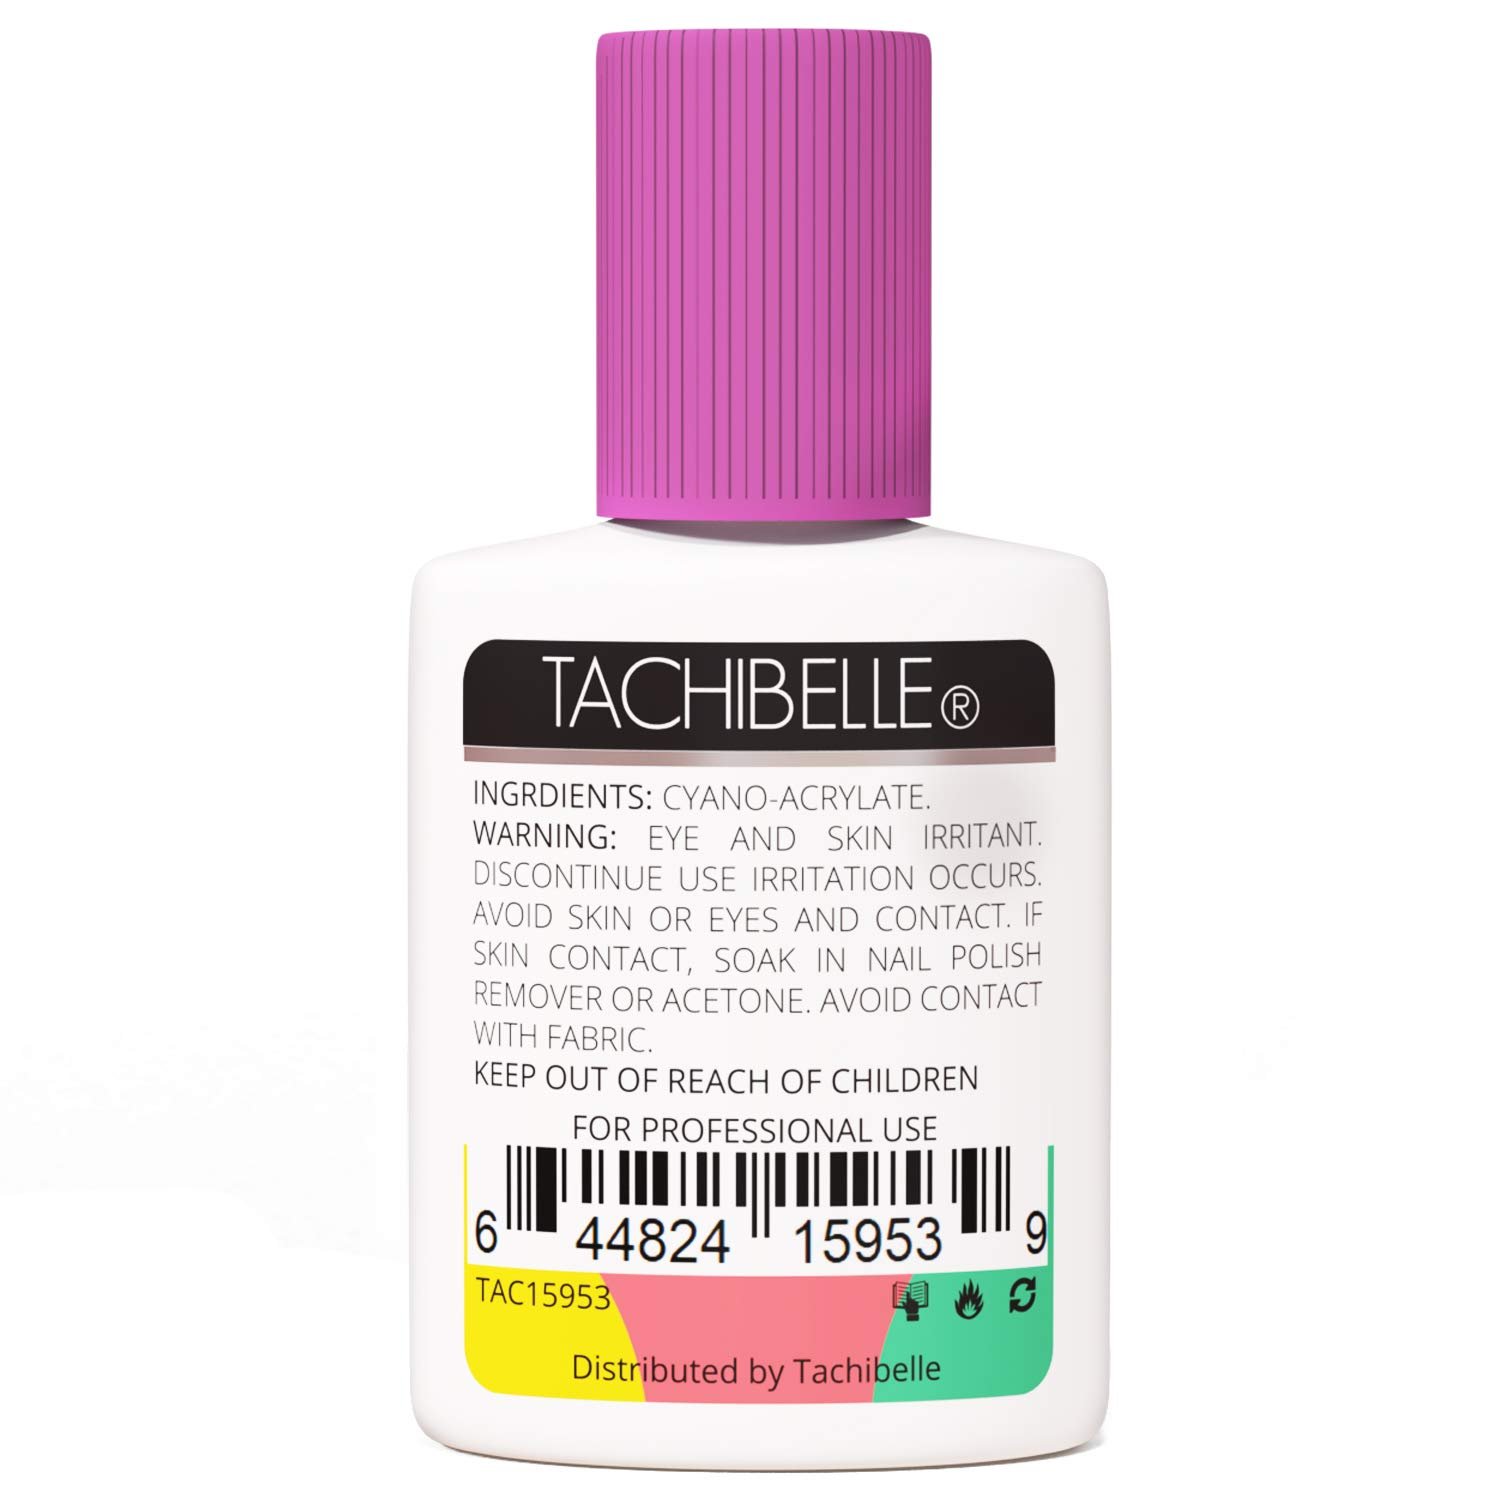 Tachibelle Super Strong Nail Glue for Acrylic Nails and Press on Nails Nail Bond Acrylic Nail Glue Adhesive, Perfect for False Acrylic Nail Art, Glitter, Gems, White Clear Tip Applications Pack of 3 - image 2 of 2